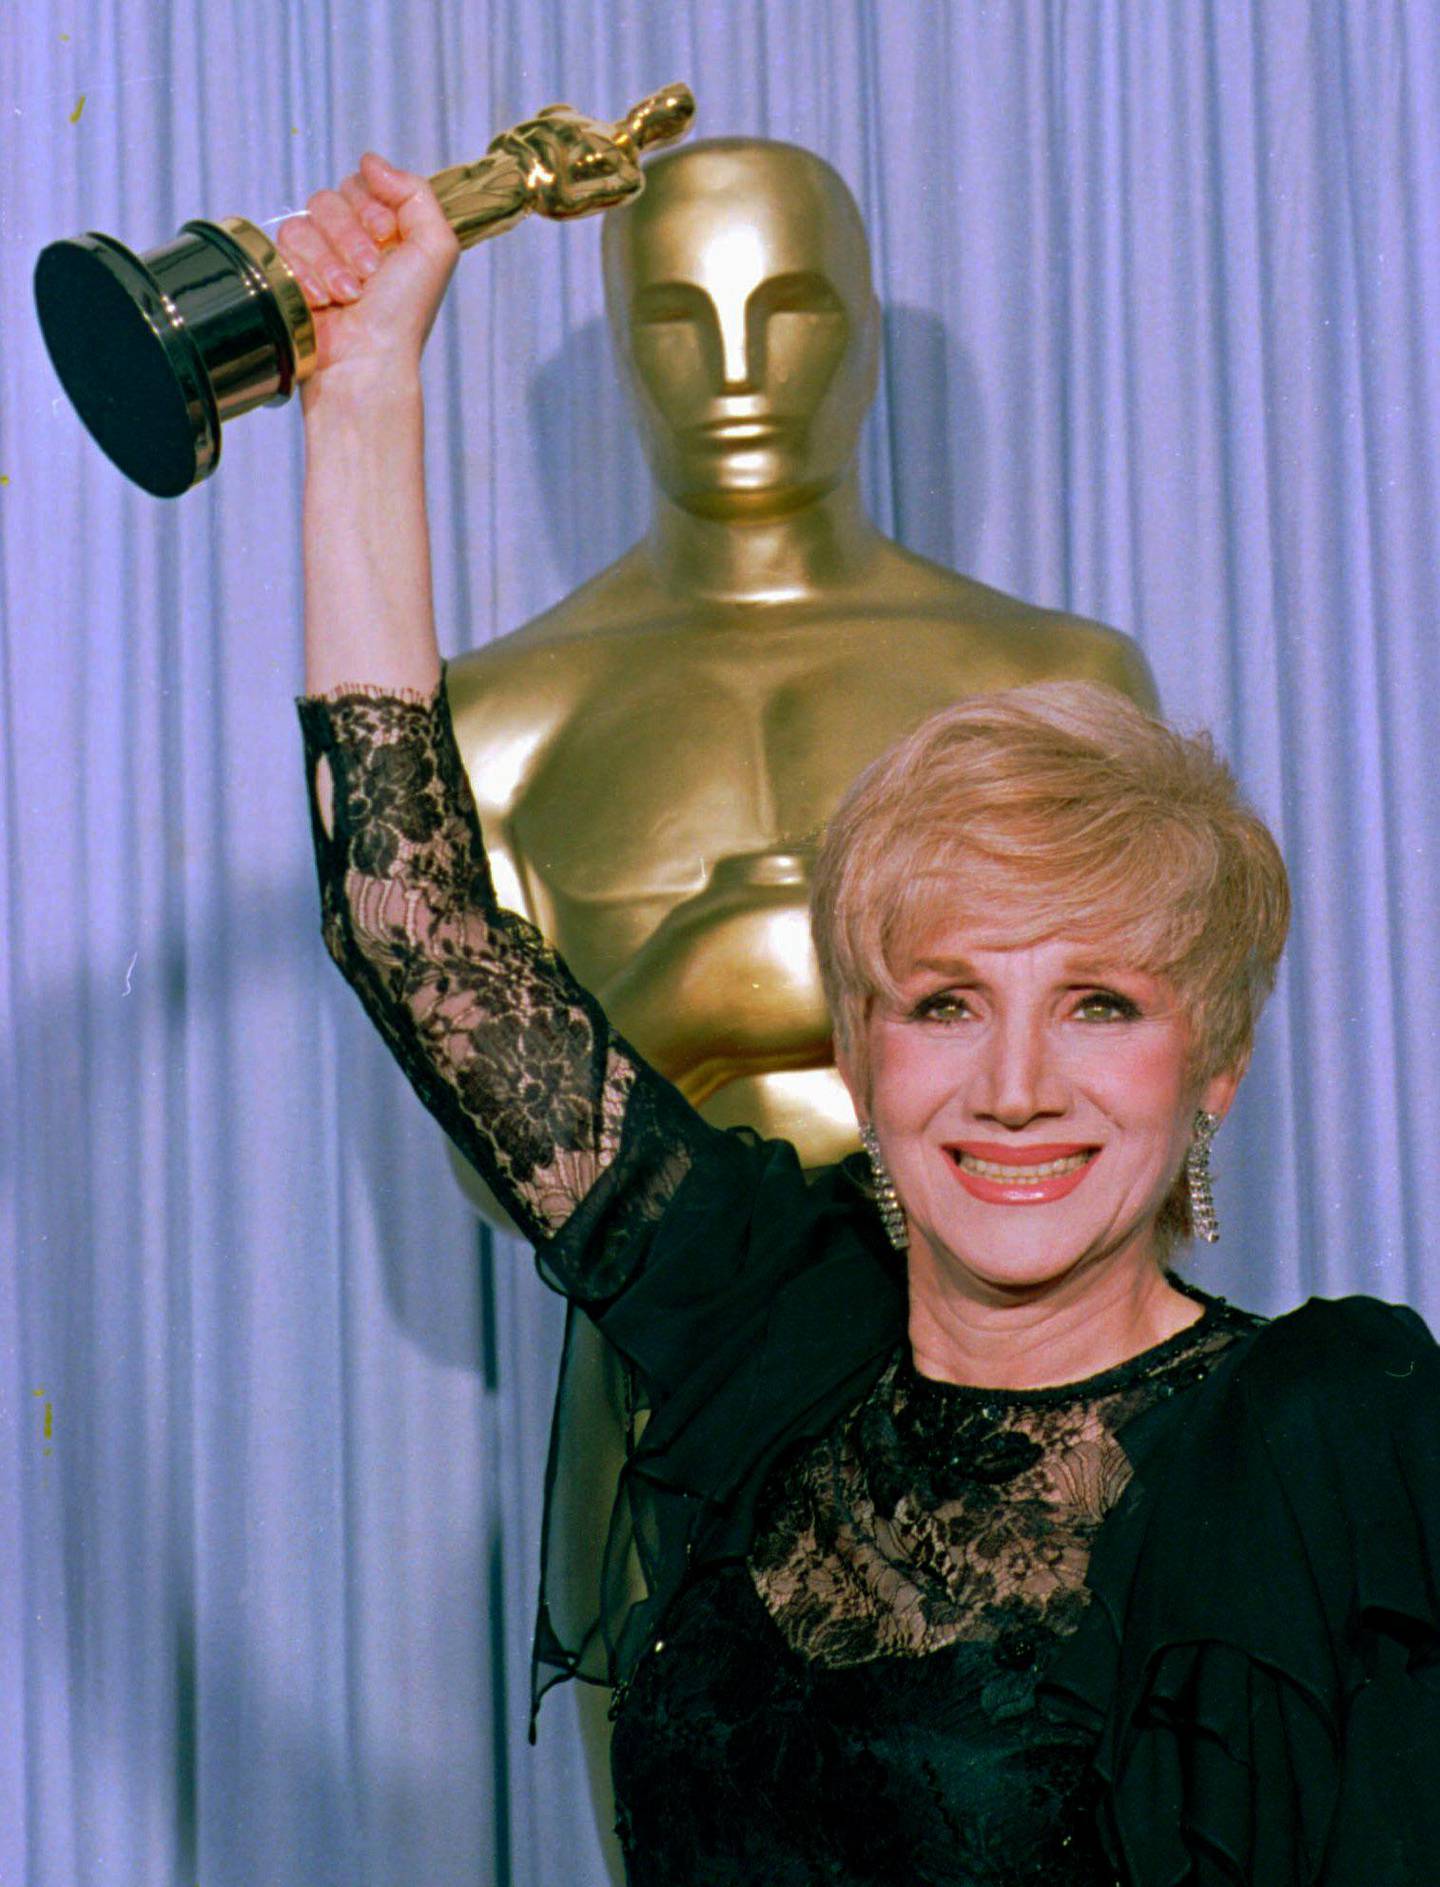 FILE - In this April 11, 1988 file photo, Olympia Dukakis holds her Oscar  at the Shrine Auditorium in Los Angles after being honored at the 60th Academy Awards as best supporting actress for her role in "Moonstrck." Olympia Dukakis, the veteran stage and screen actress whose flair for maternal roles helped her win an Oscar as Cherâ€™s mother in the romantic comedy â€œMoonstruck,â€ has died. She was 89. (AP Photo/Lennox Mcleondon, File)